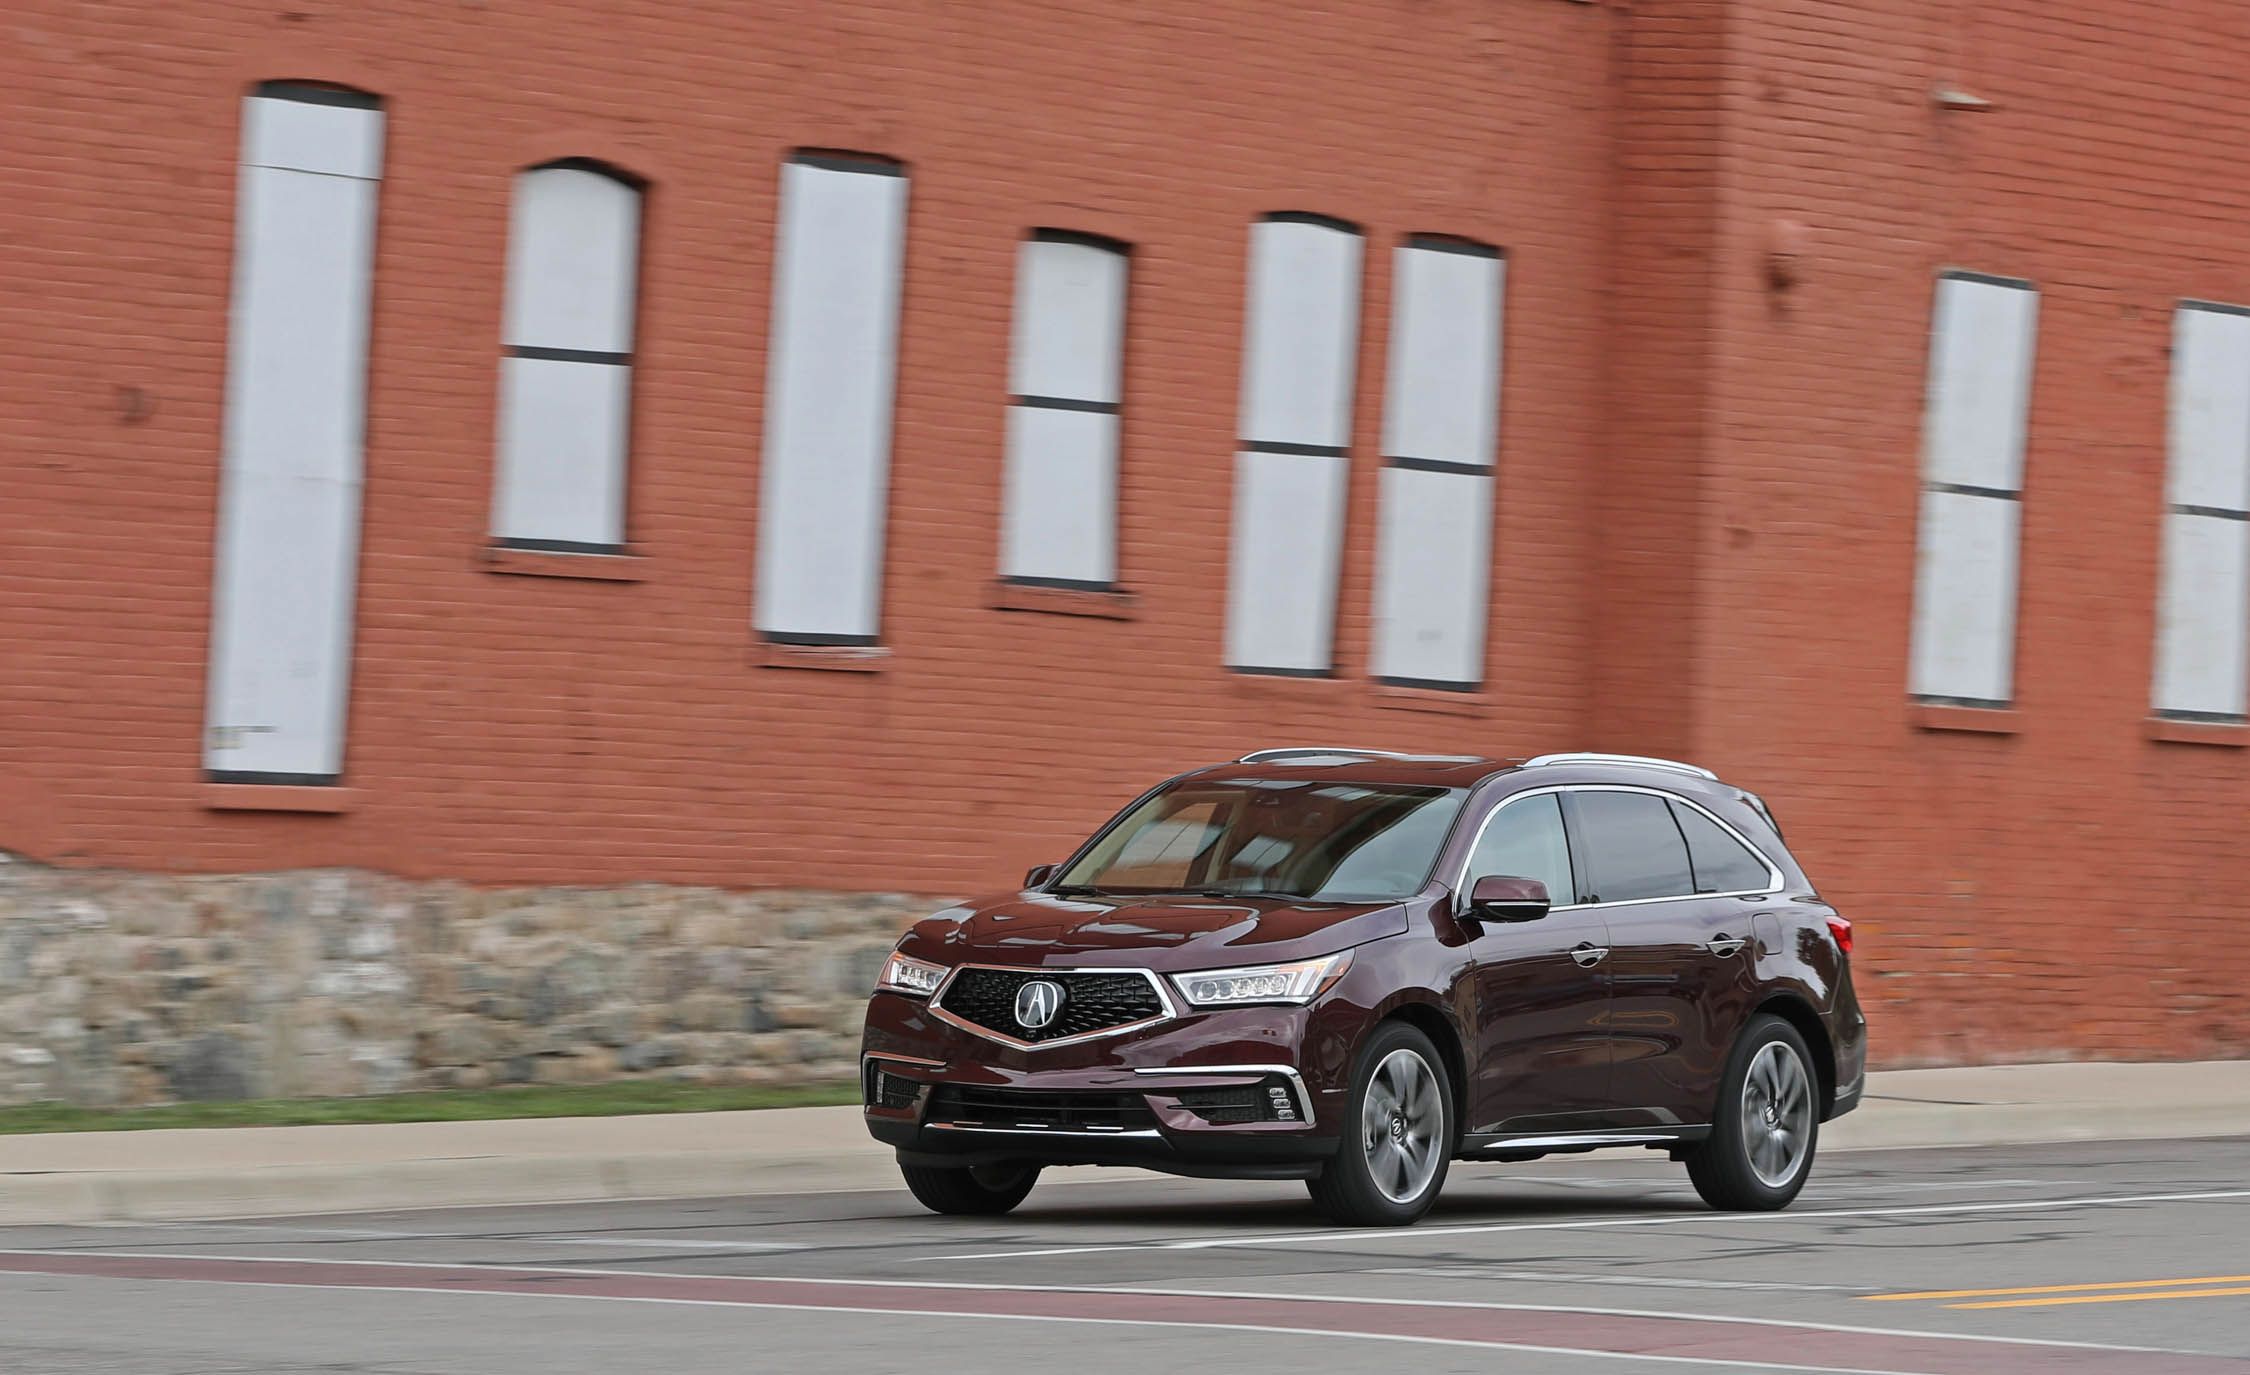 2017 Acura Mdx Test (View 4 of 22)